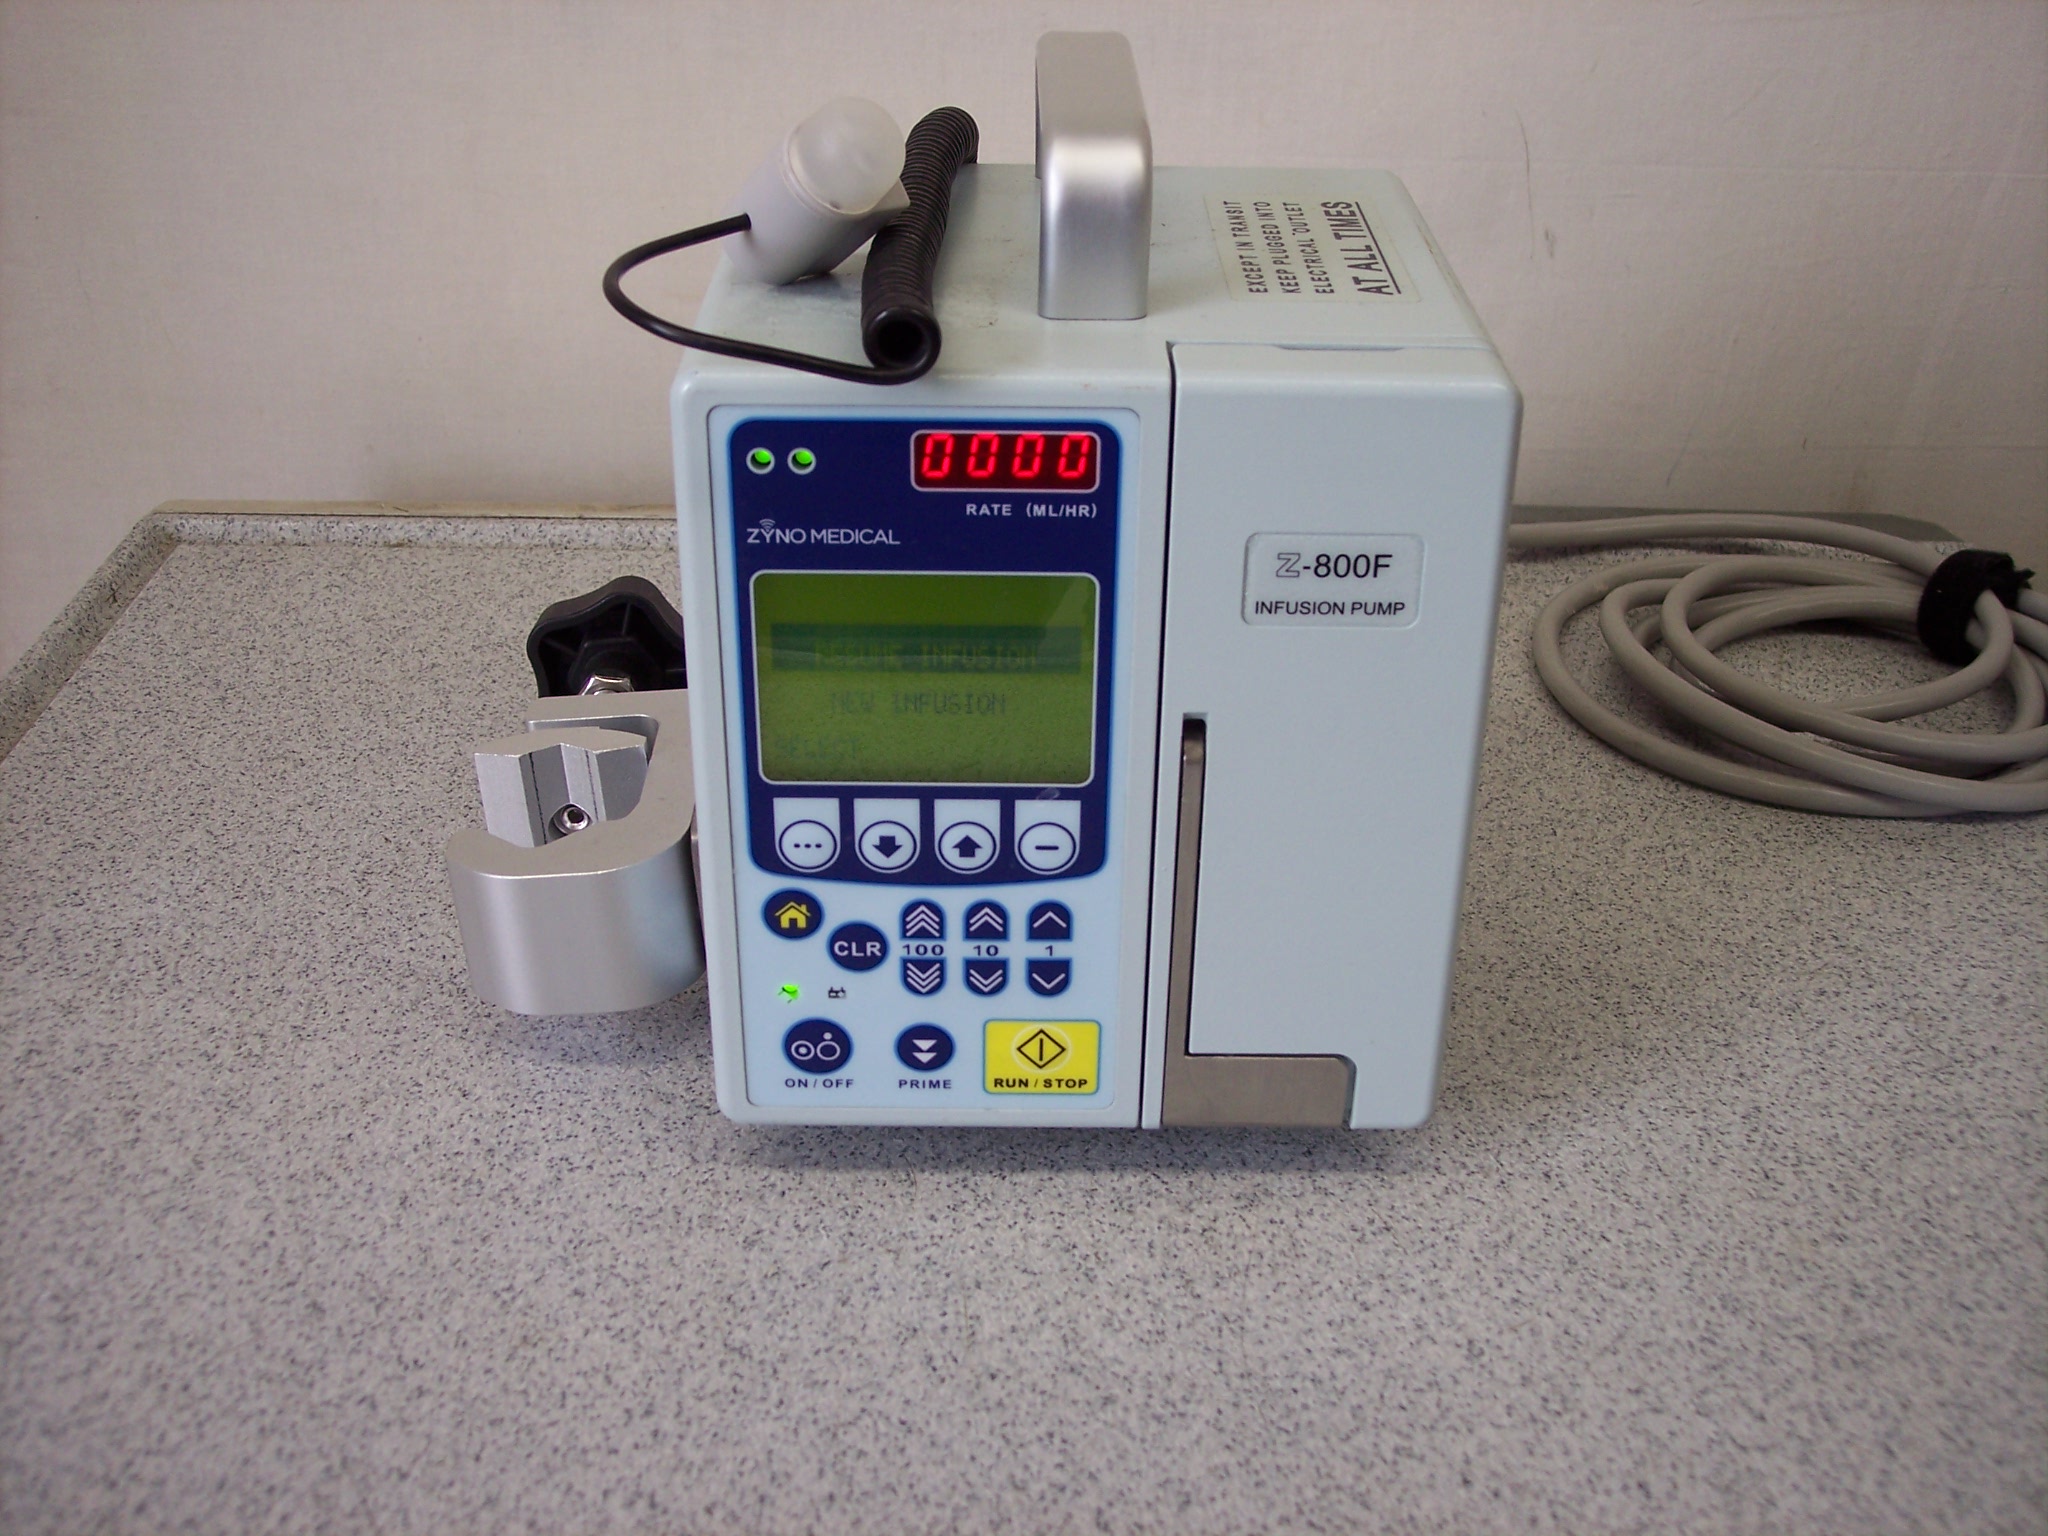 Zyno Medical Z-800F Infusion Pump